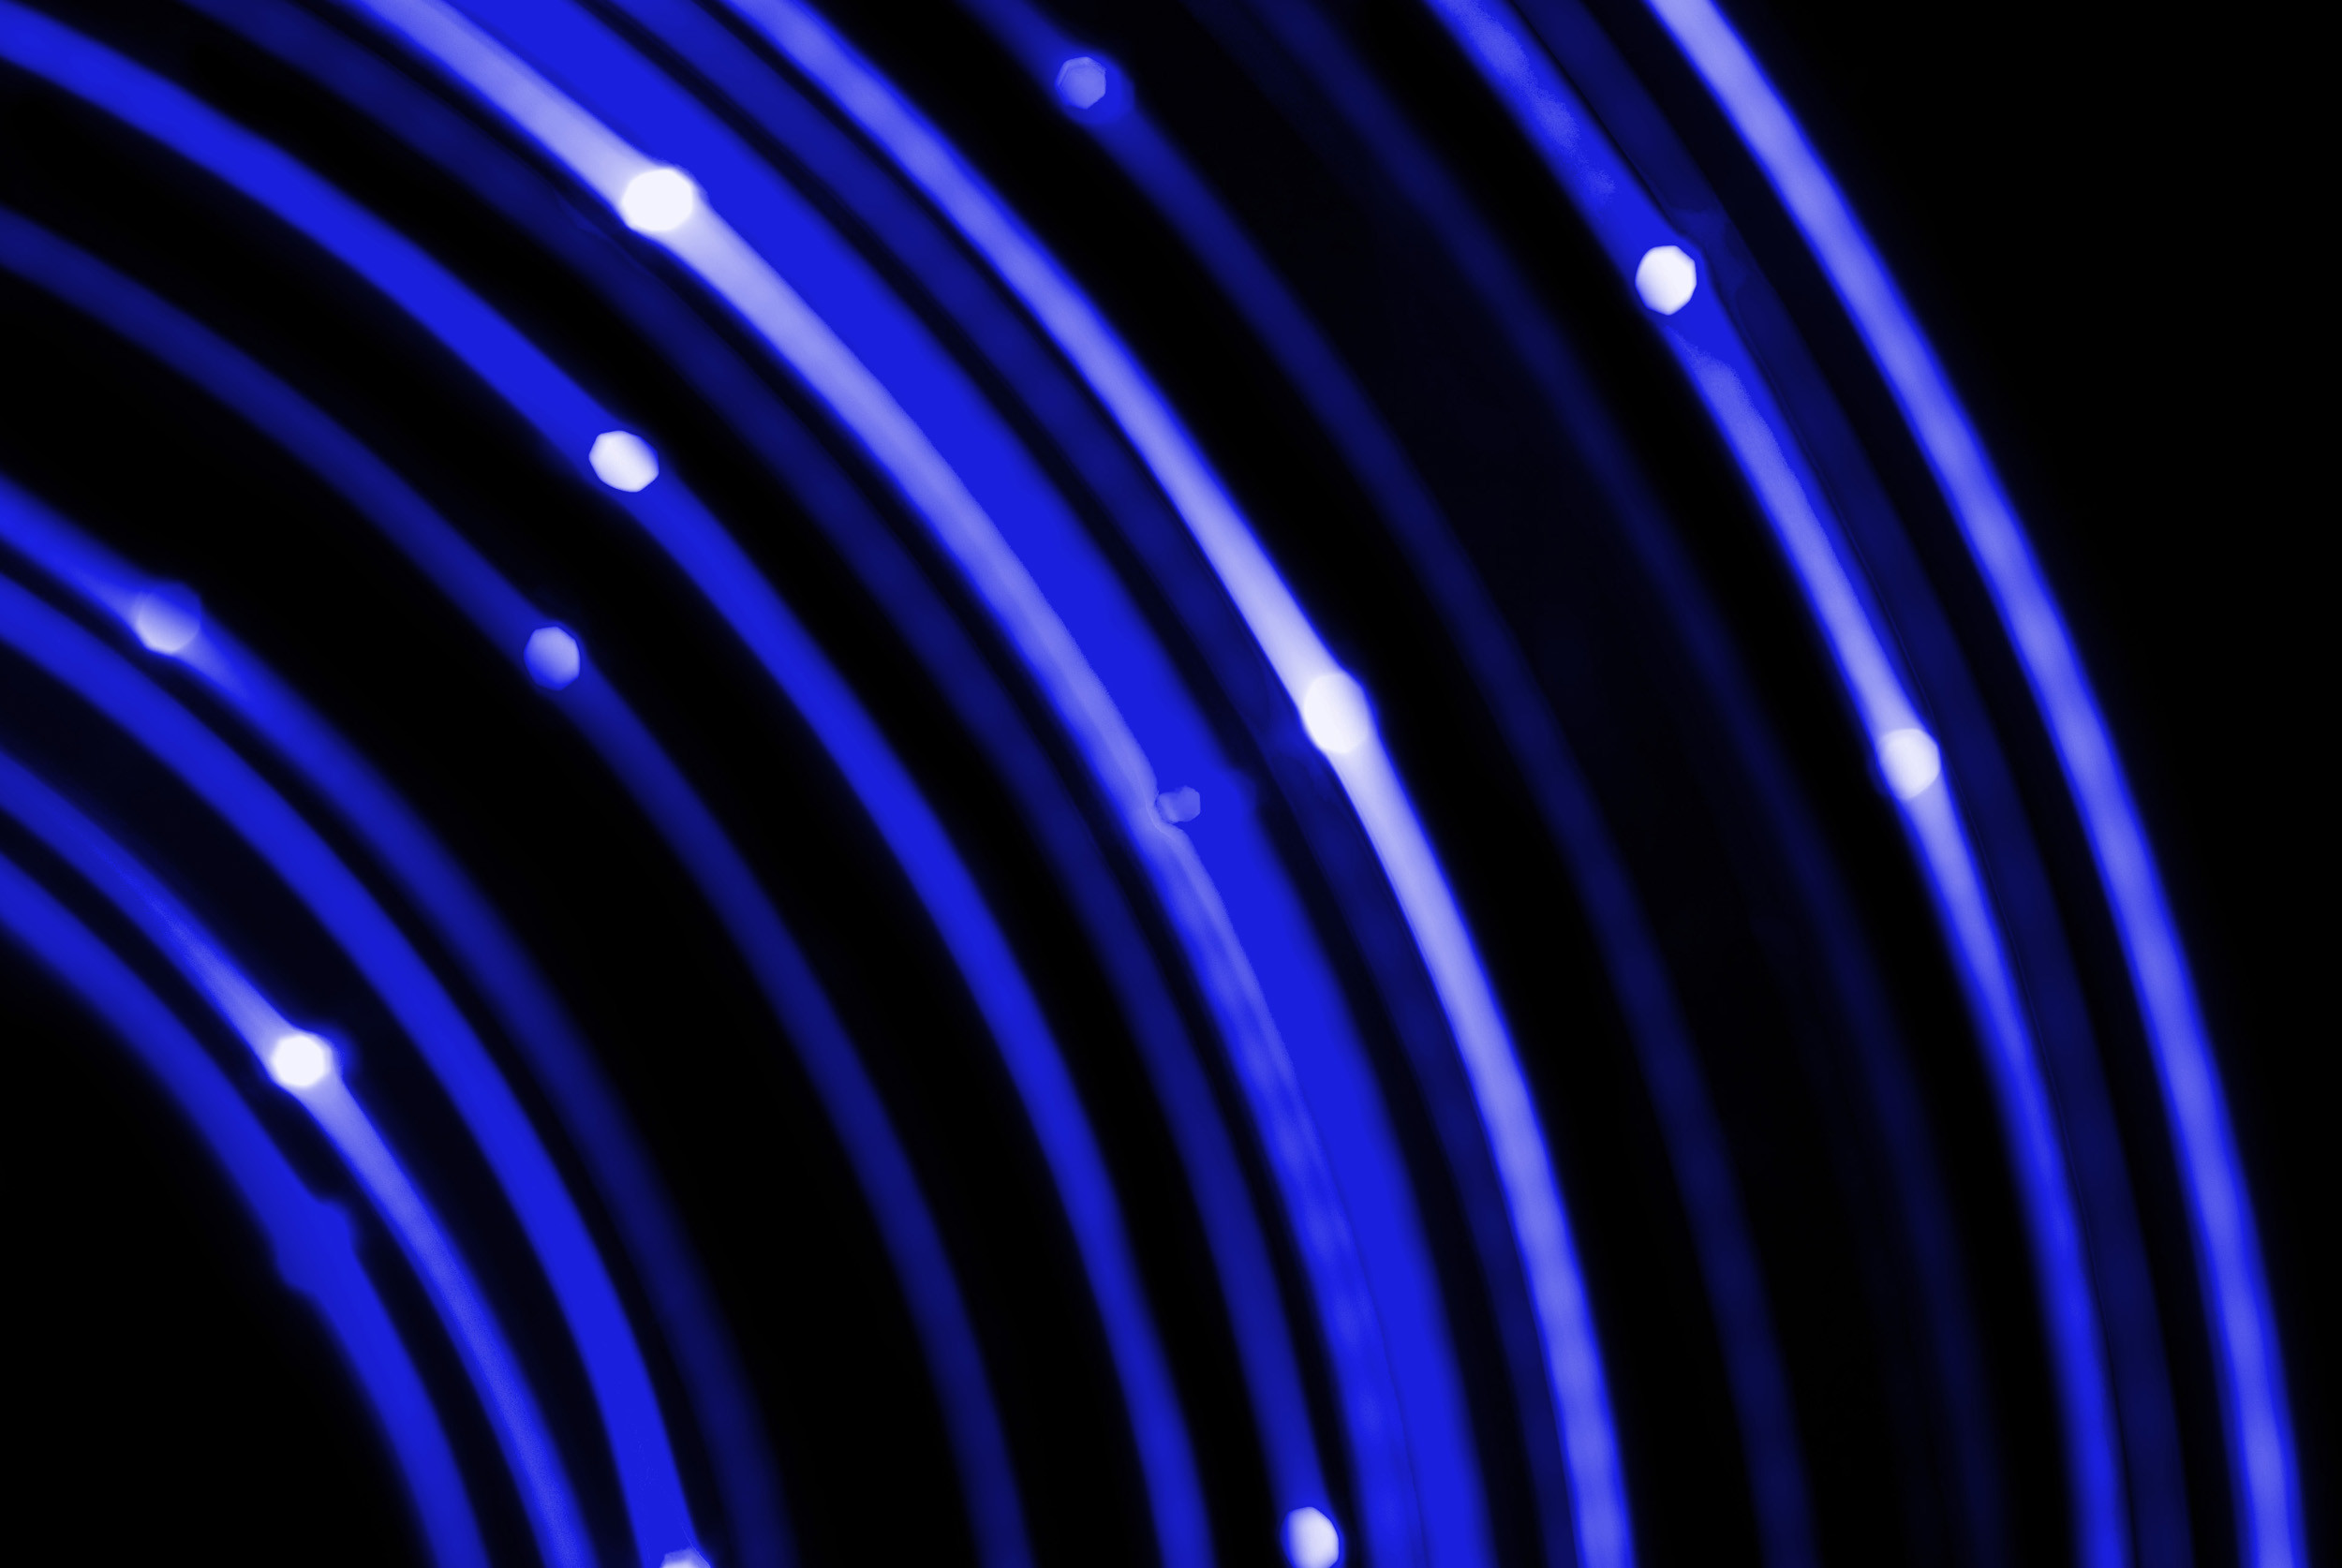 2500x1674 concentric curved blue coloured lines of light on a black background